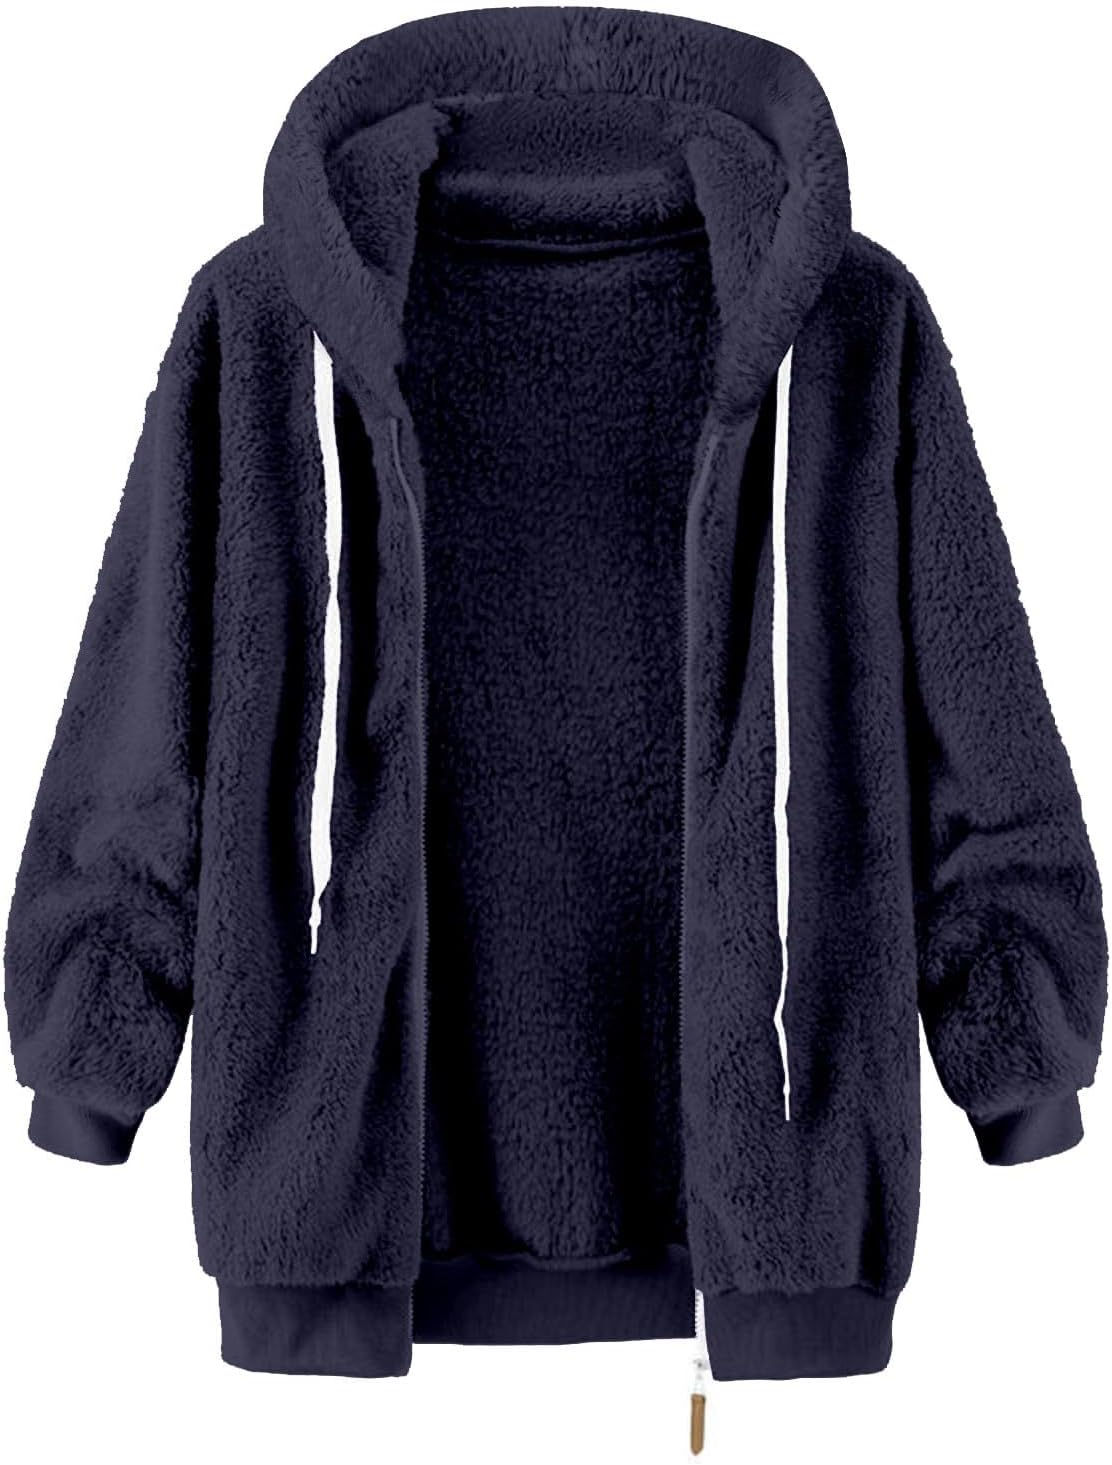 Winter Coats For Women Fuzzy Fleece Jacket Hooded Color Block Patchwork Cardigan Coats Outerwear With Pockets